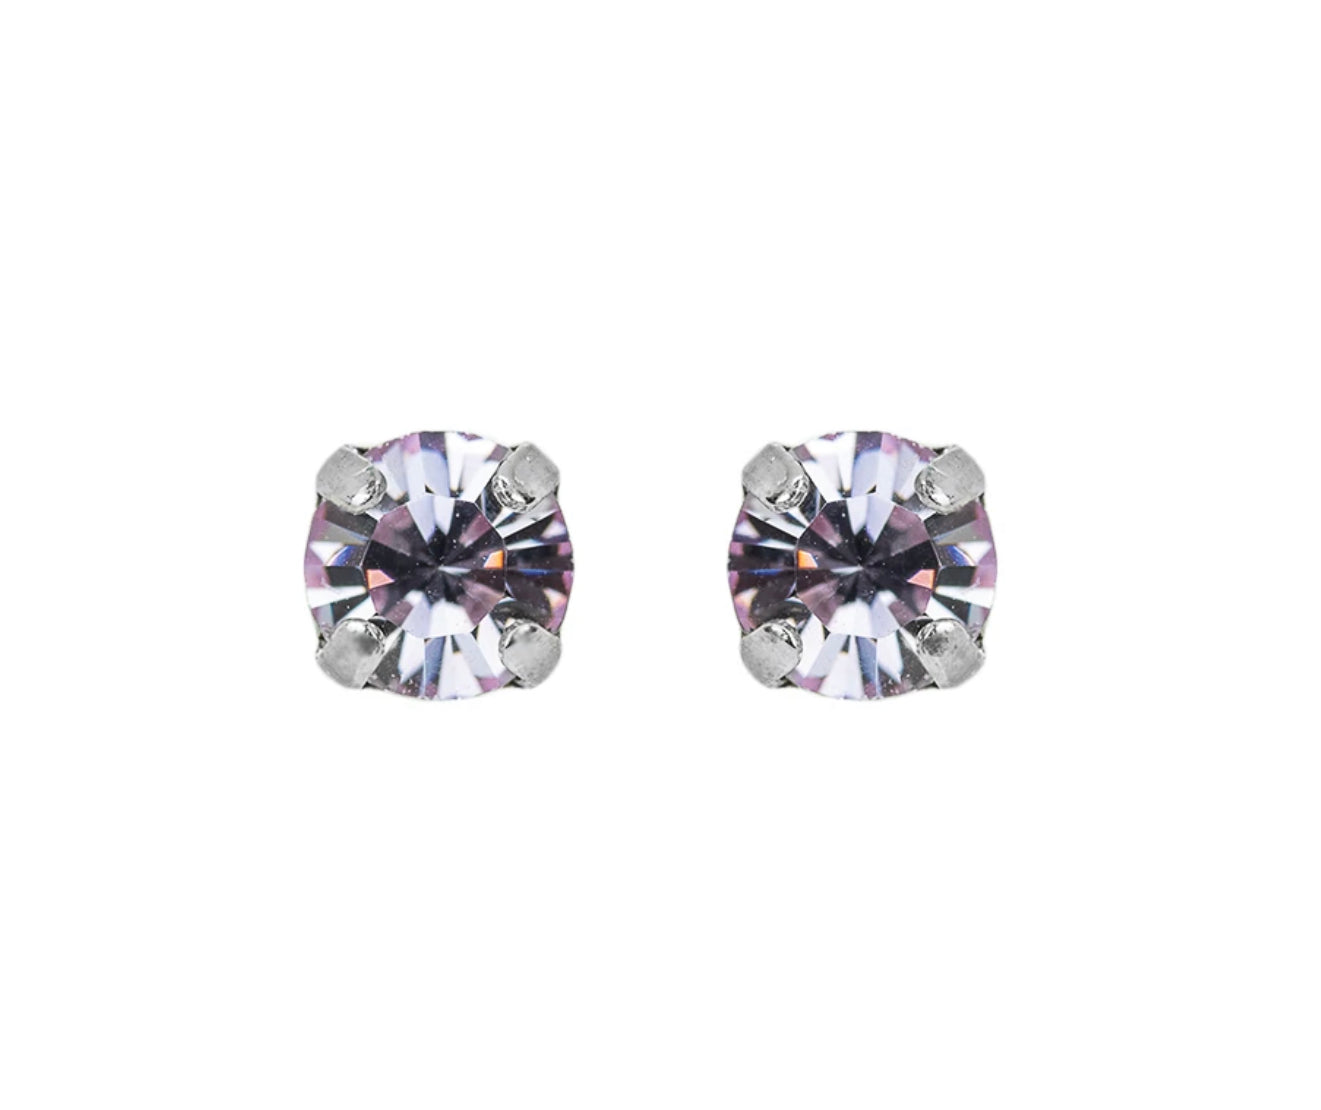 Mariana Antiqued Silver Must-Have Post Earrings in "Violet"